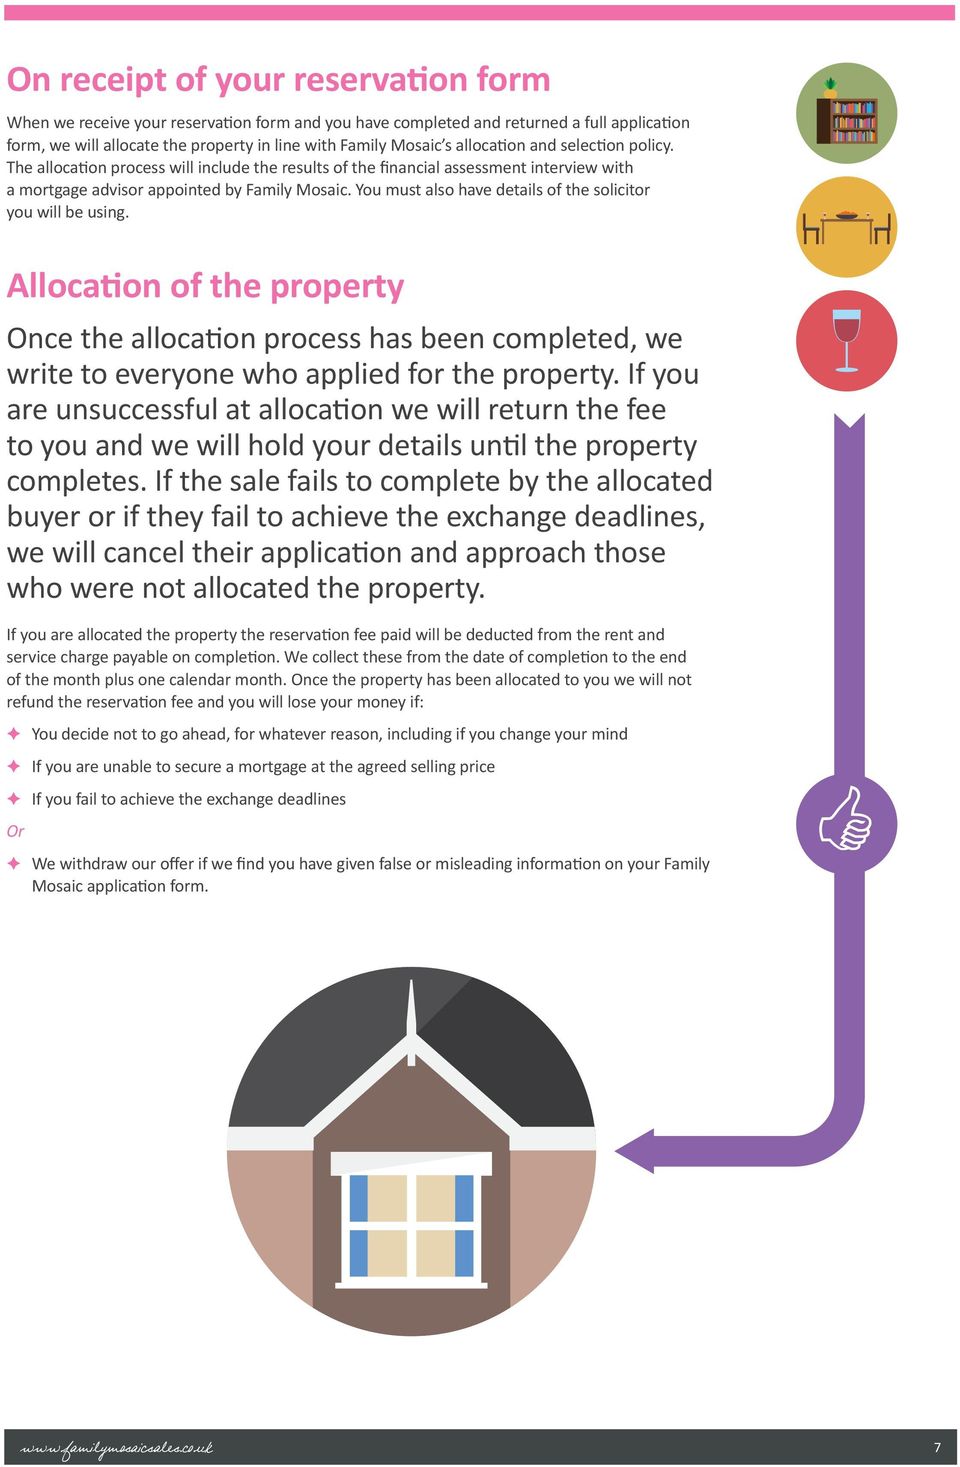 You must also have details of the solicitor you will be using. Allocation of the property Once the allocation process has been completed, we write to everyone who applied for the property.